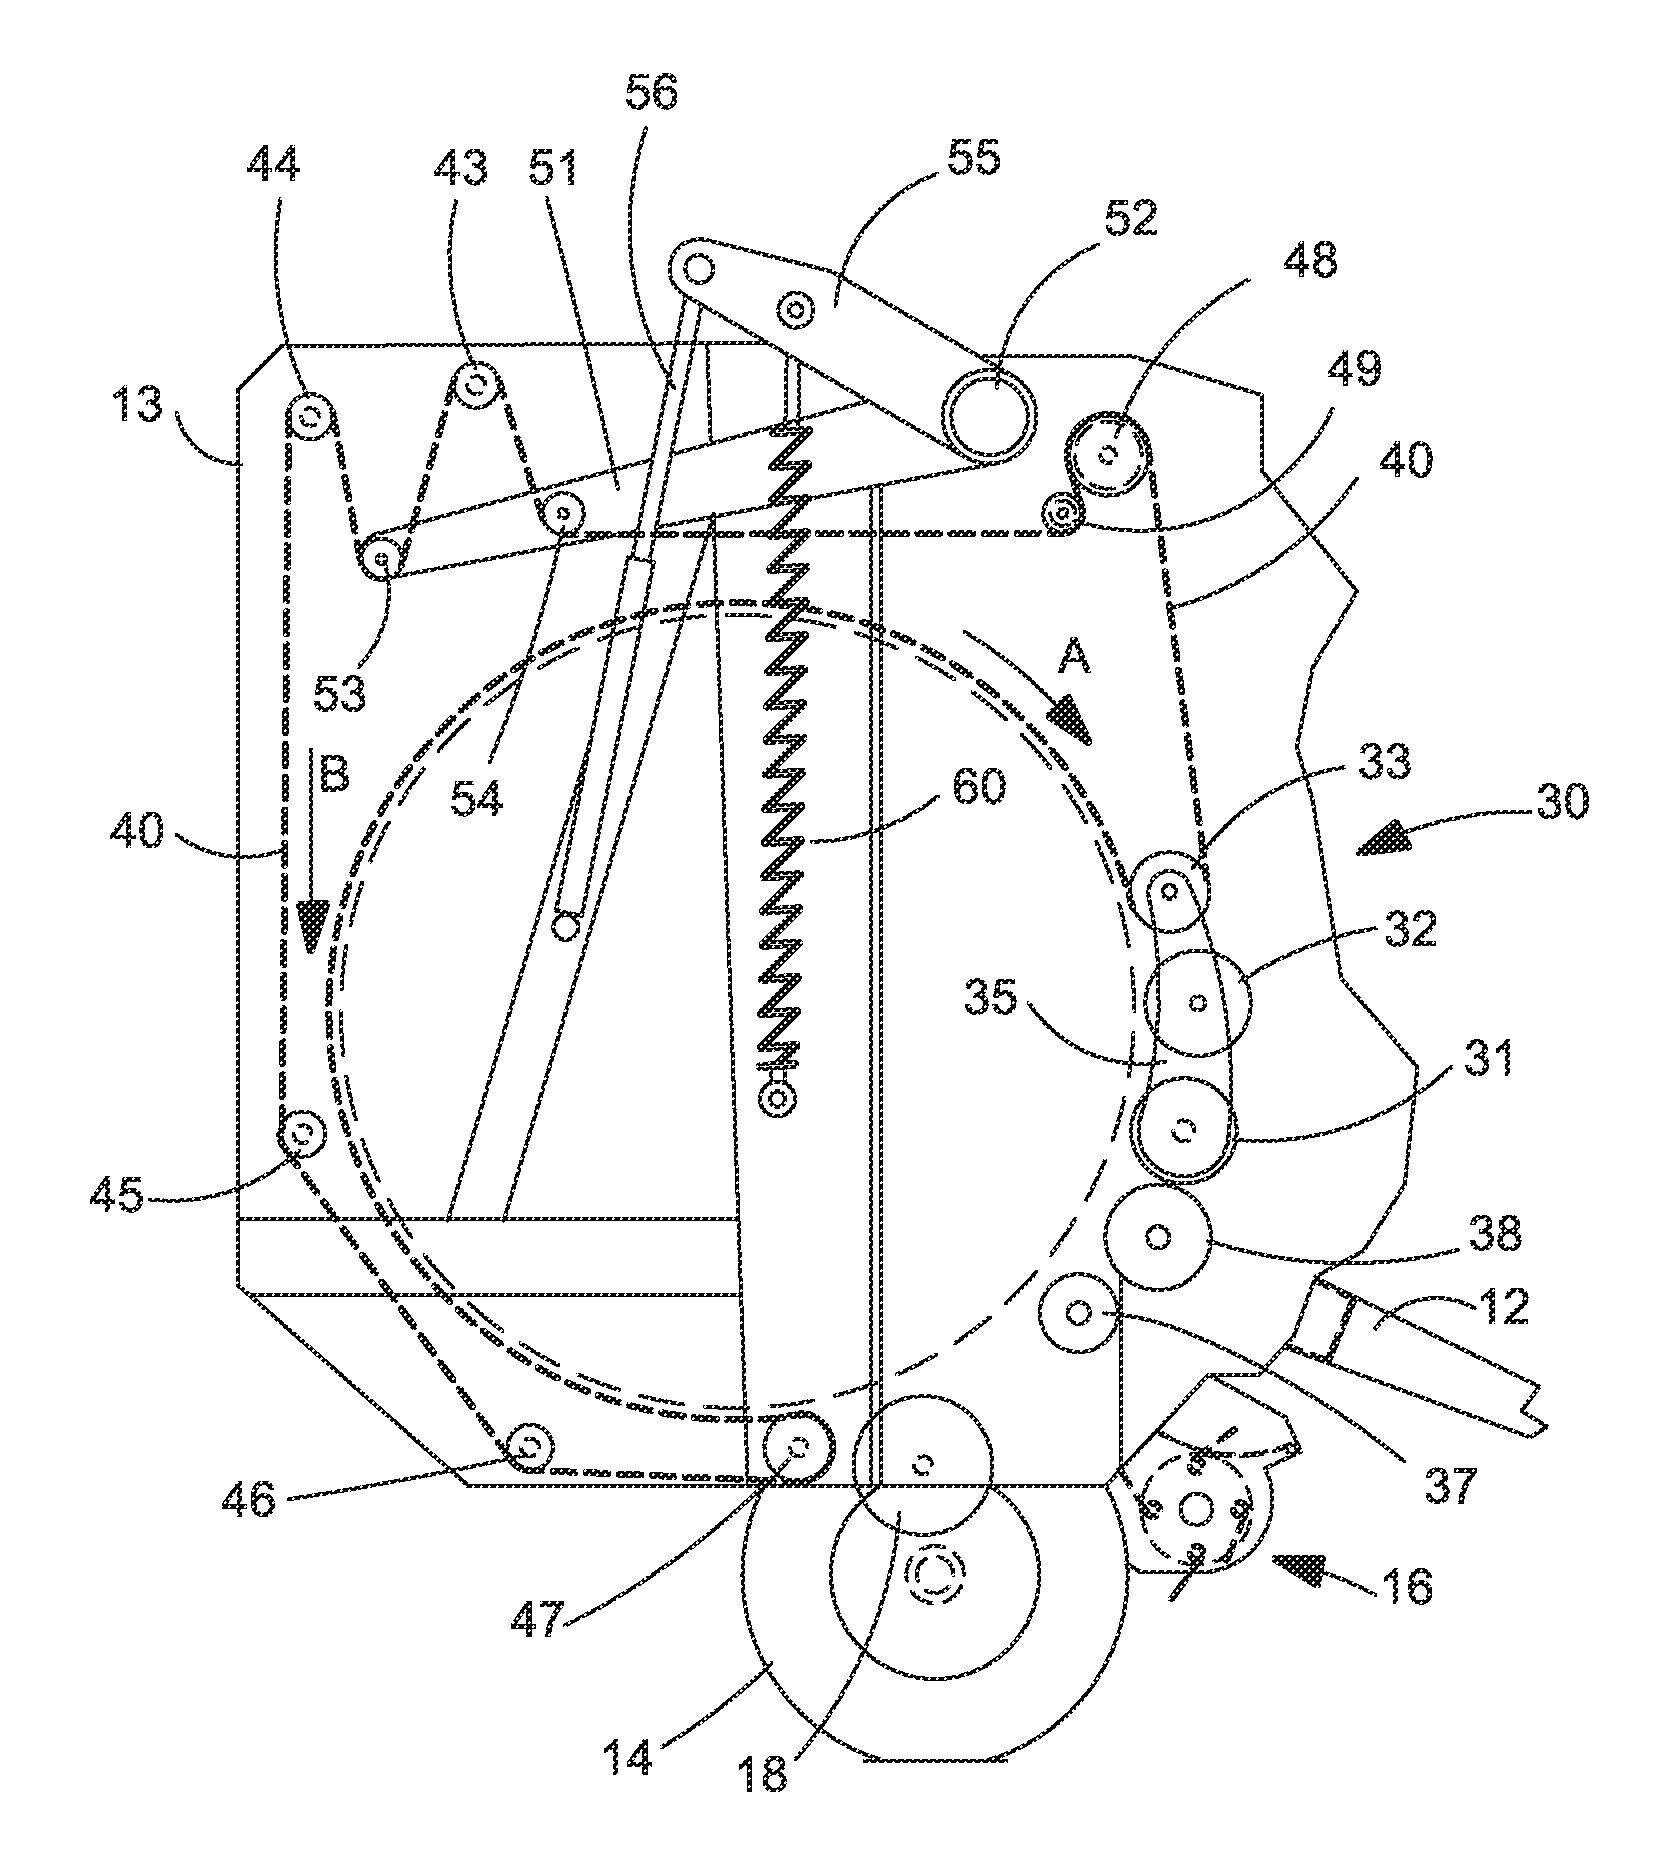 Density system bypass for a round baler